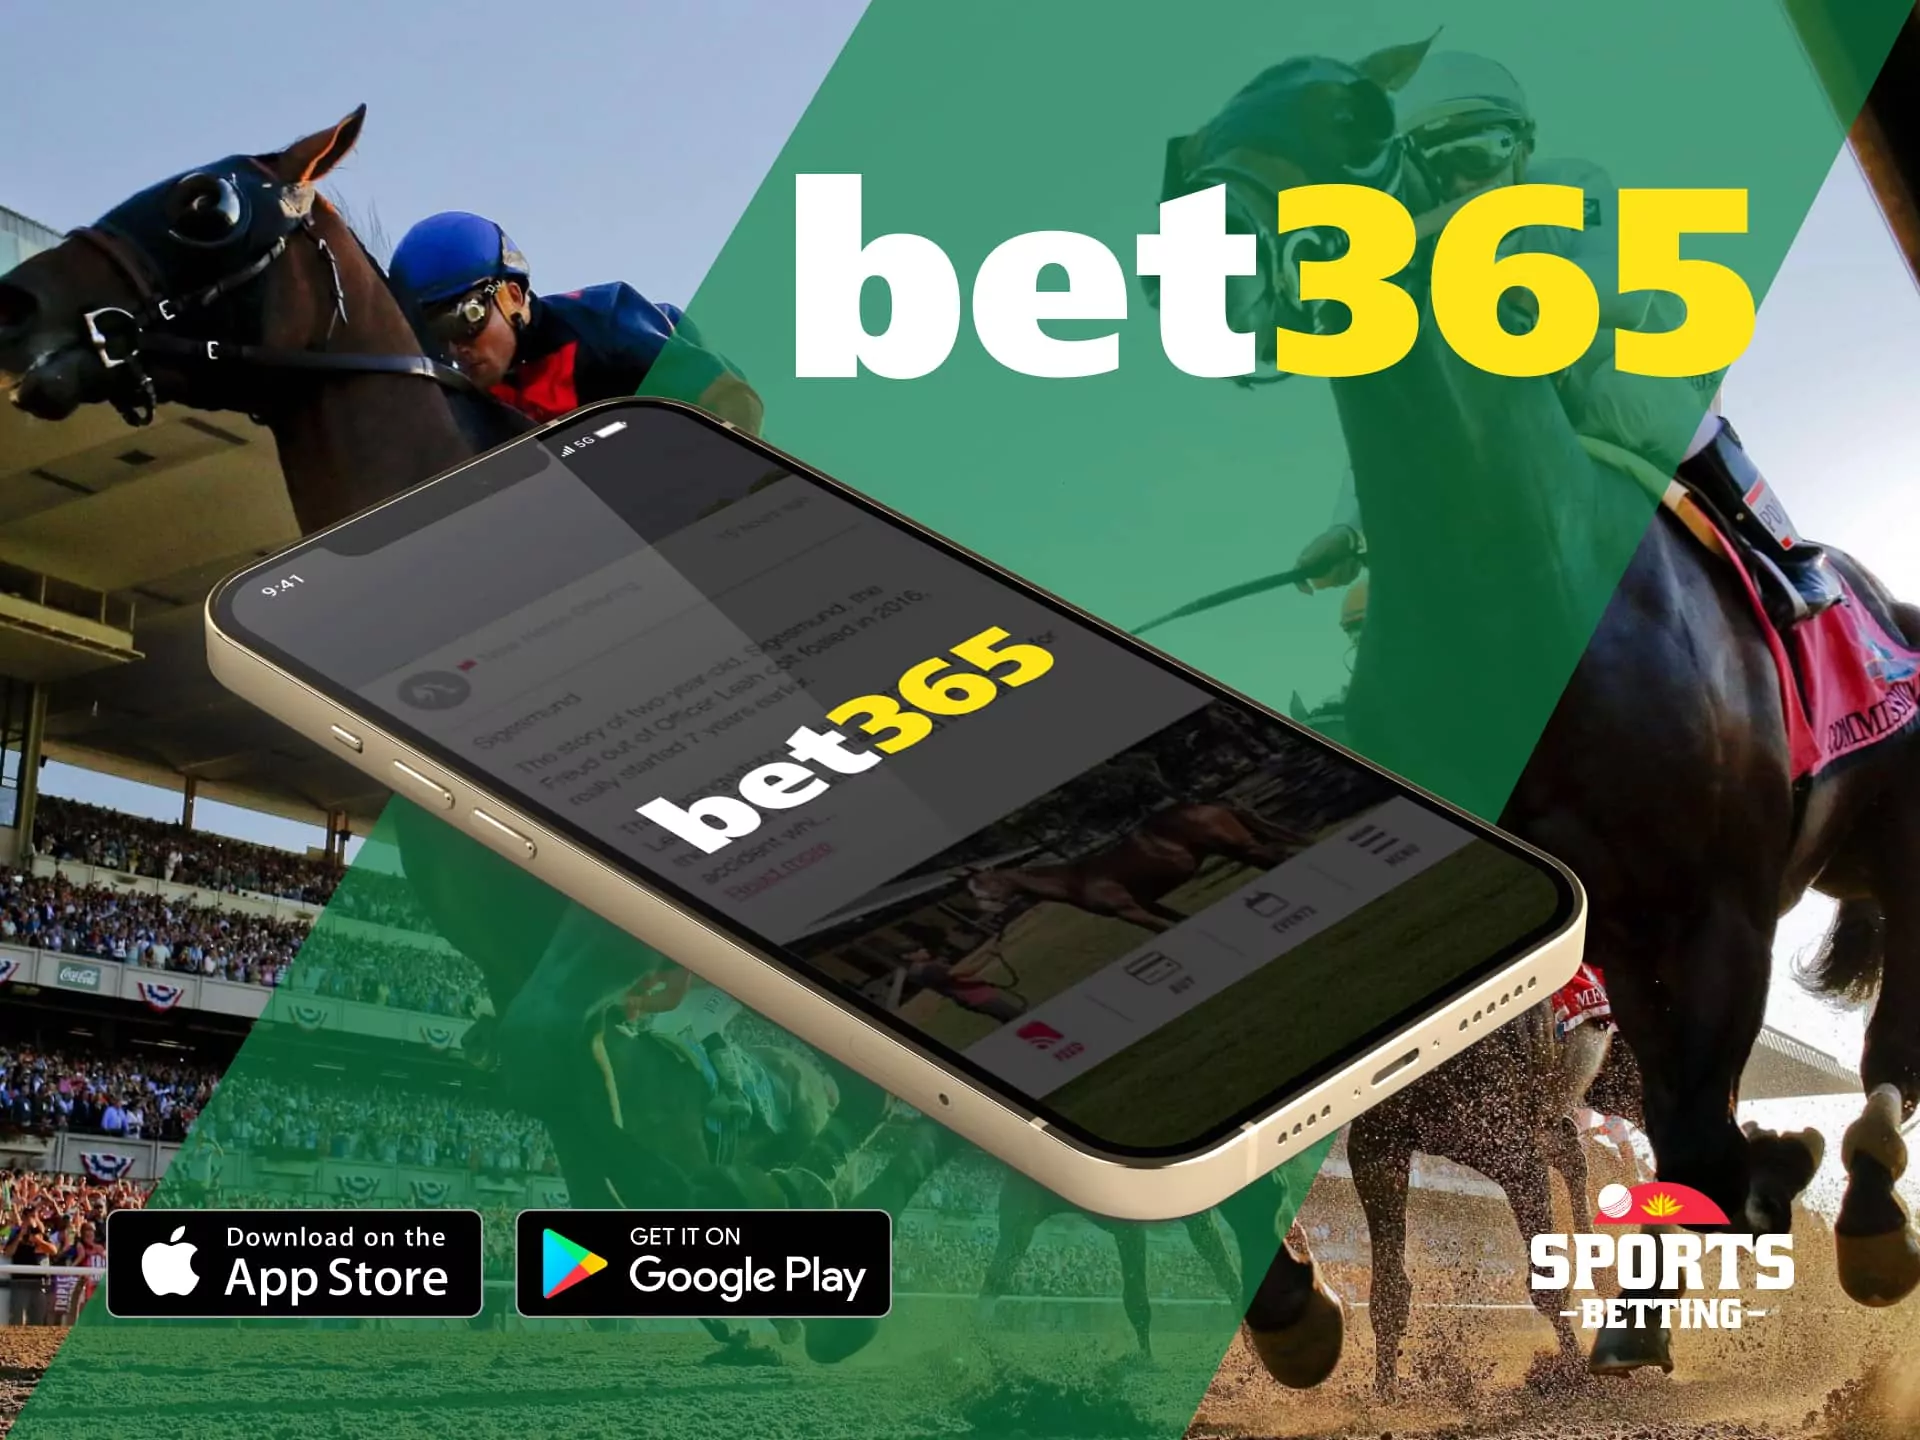 Bet365 horse racing betting site with not bado odds, compared to other bookmakers.